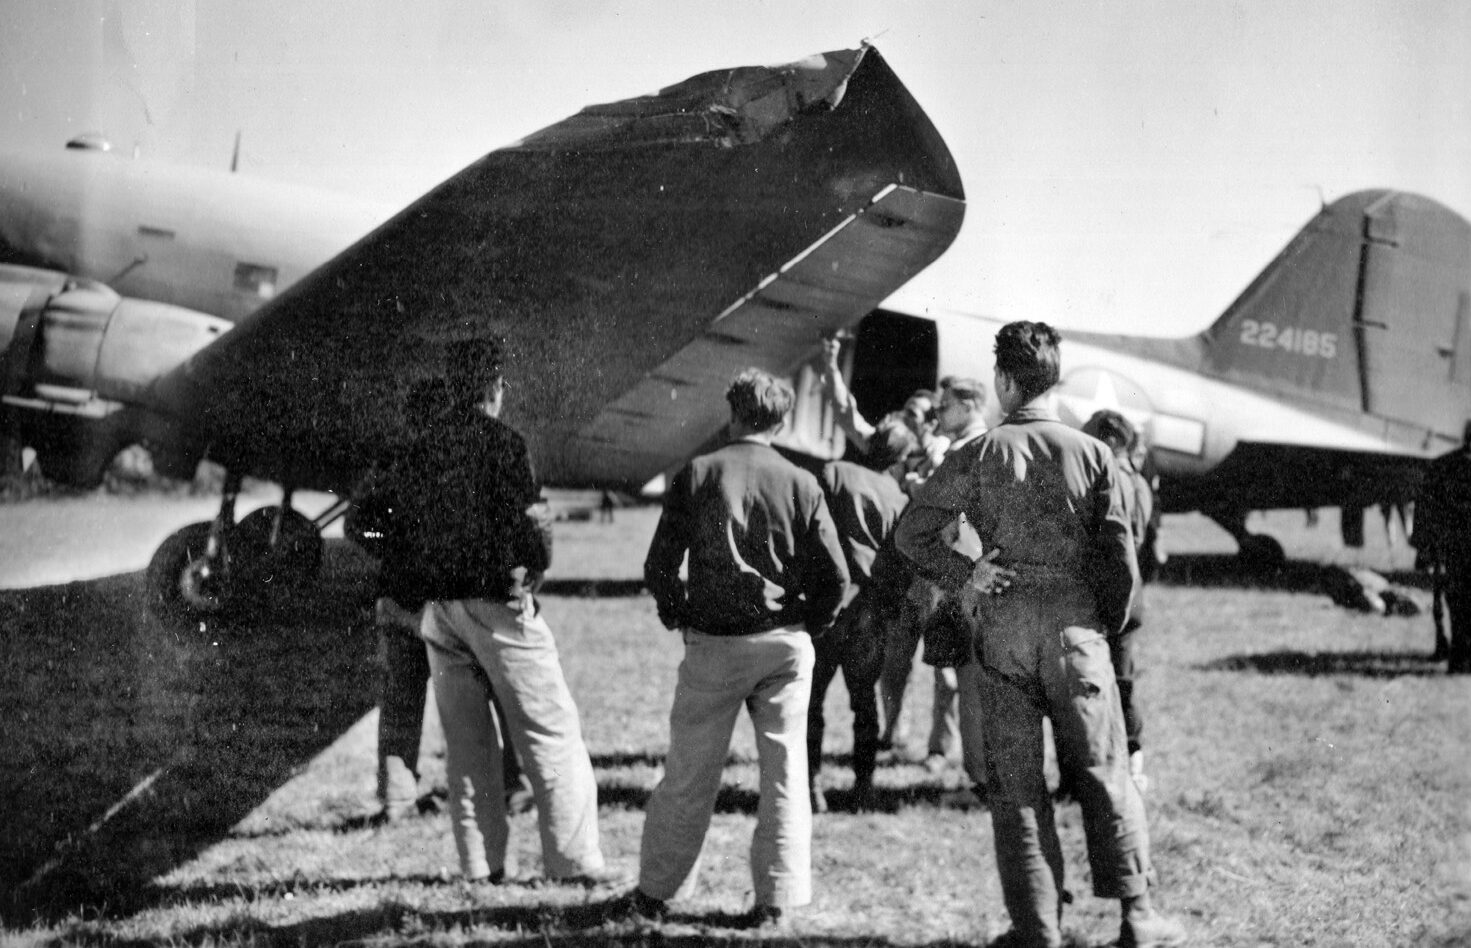 A group of American airmen inspect the damage done to a C-47 transport plane during an Operation Halyard mission. The C-47 clipped a haystack during its landing approach at an airfield near Koceljeva, in what is now western Serbia. 